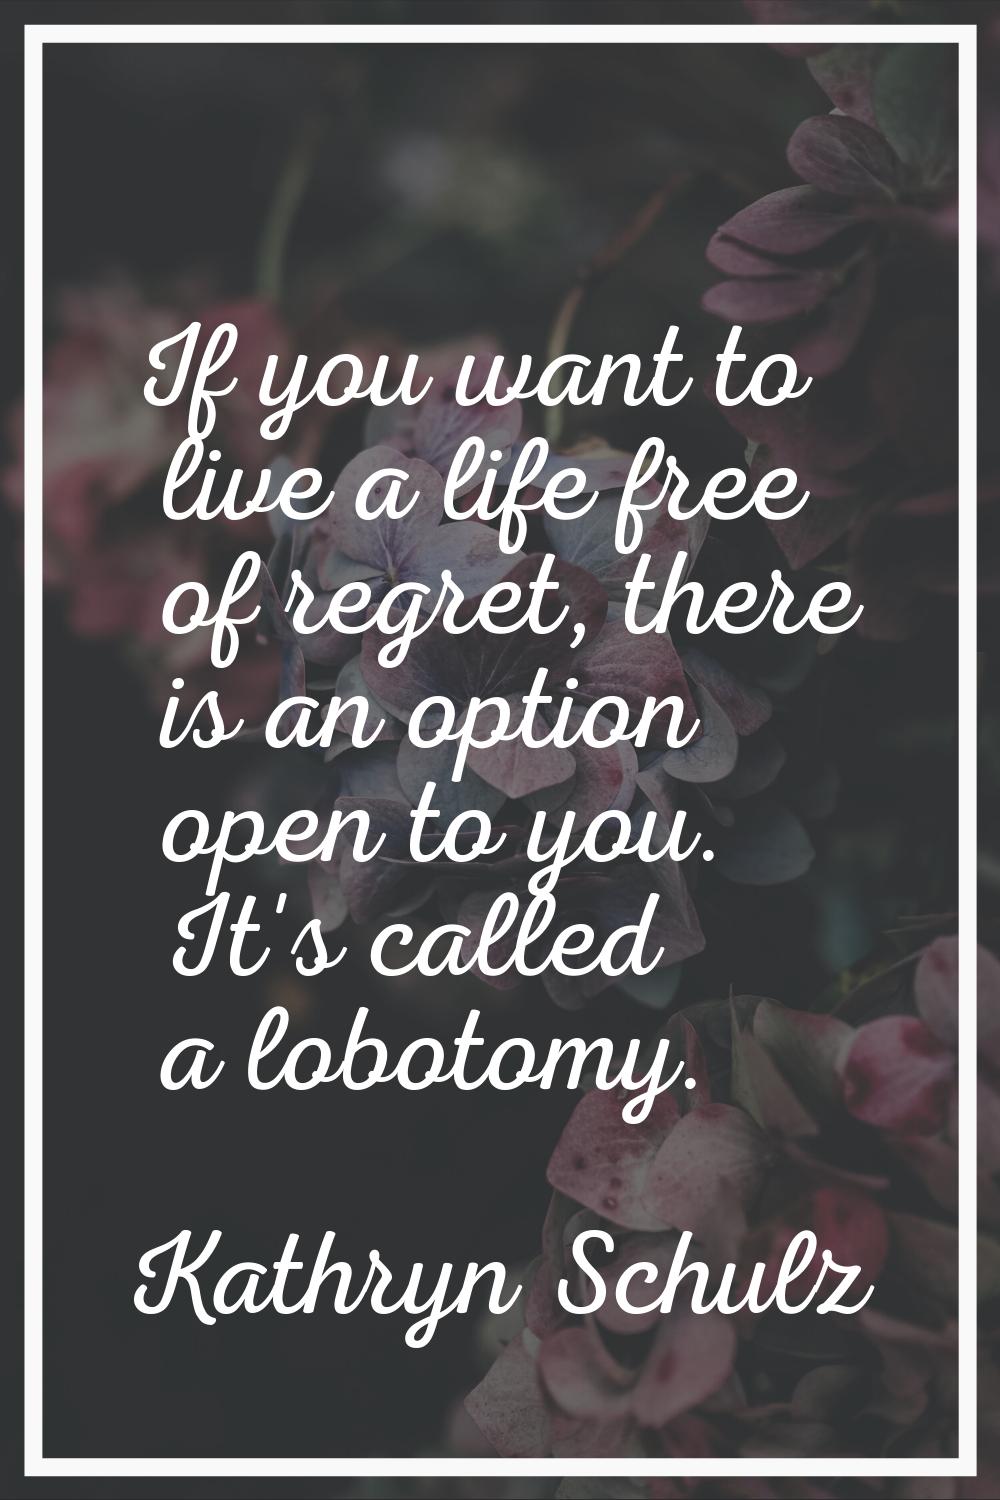 If you want to live a life free of regret, there is an option open to you. It's called a lobotomy.